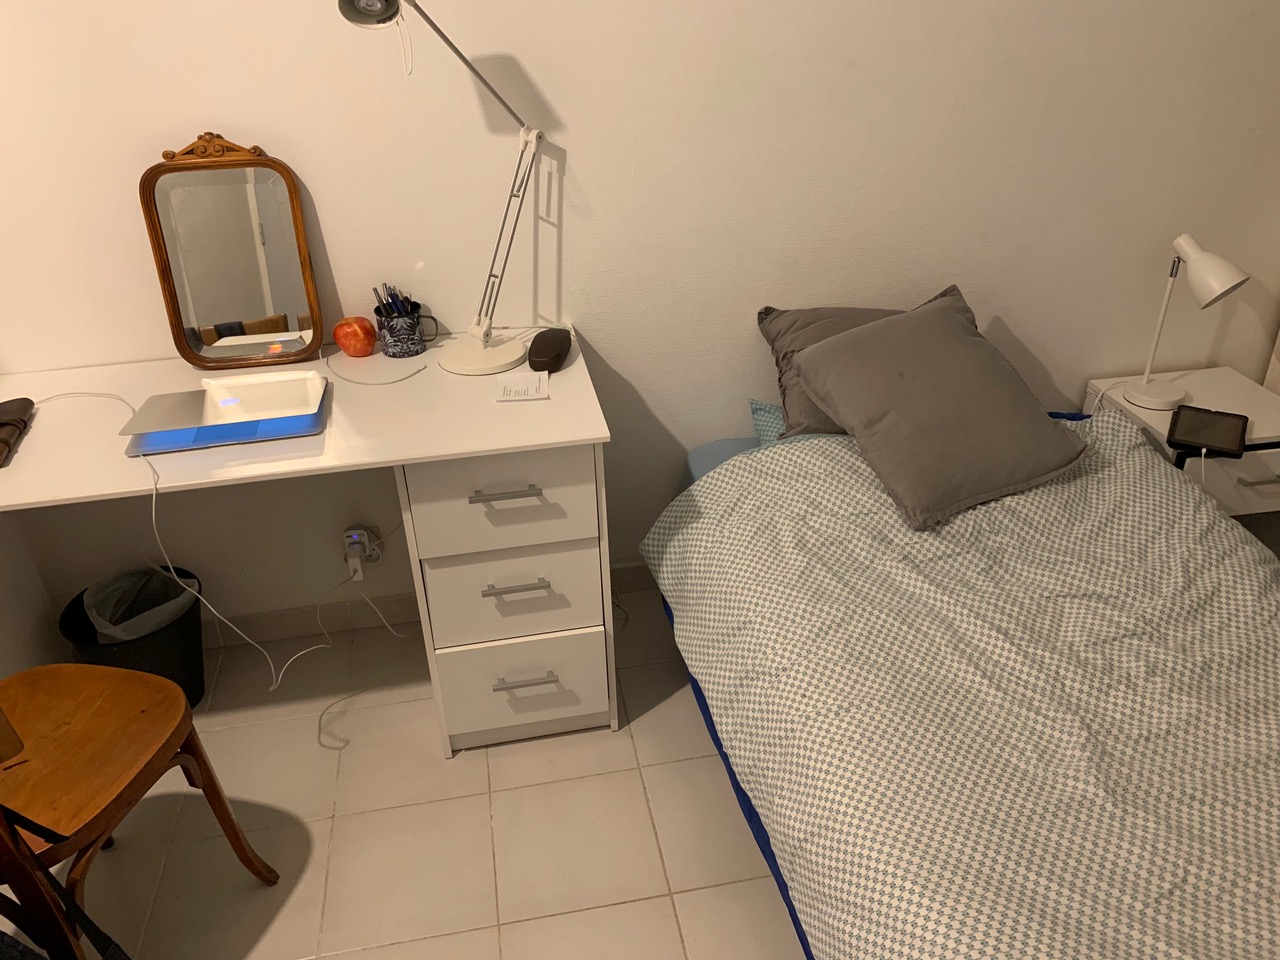 My temporary bedroom: a narrow bed, desk with a mirror and chair